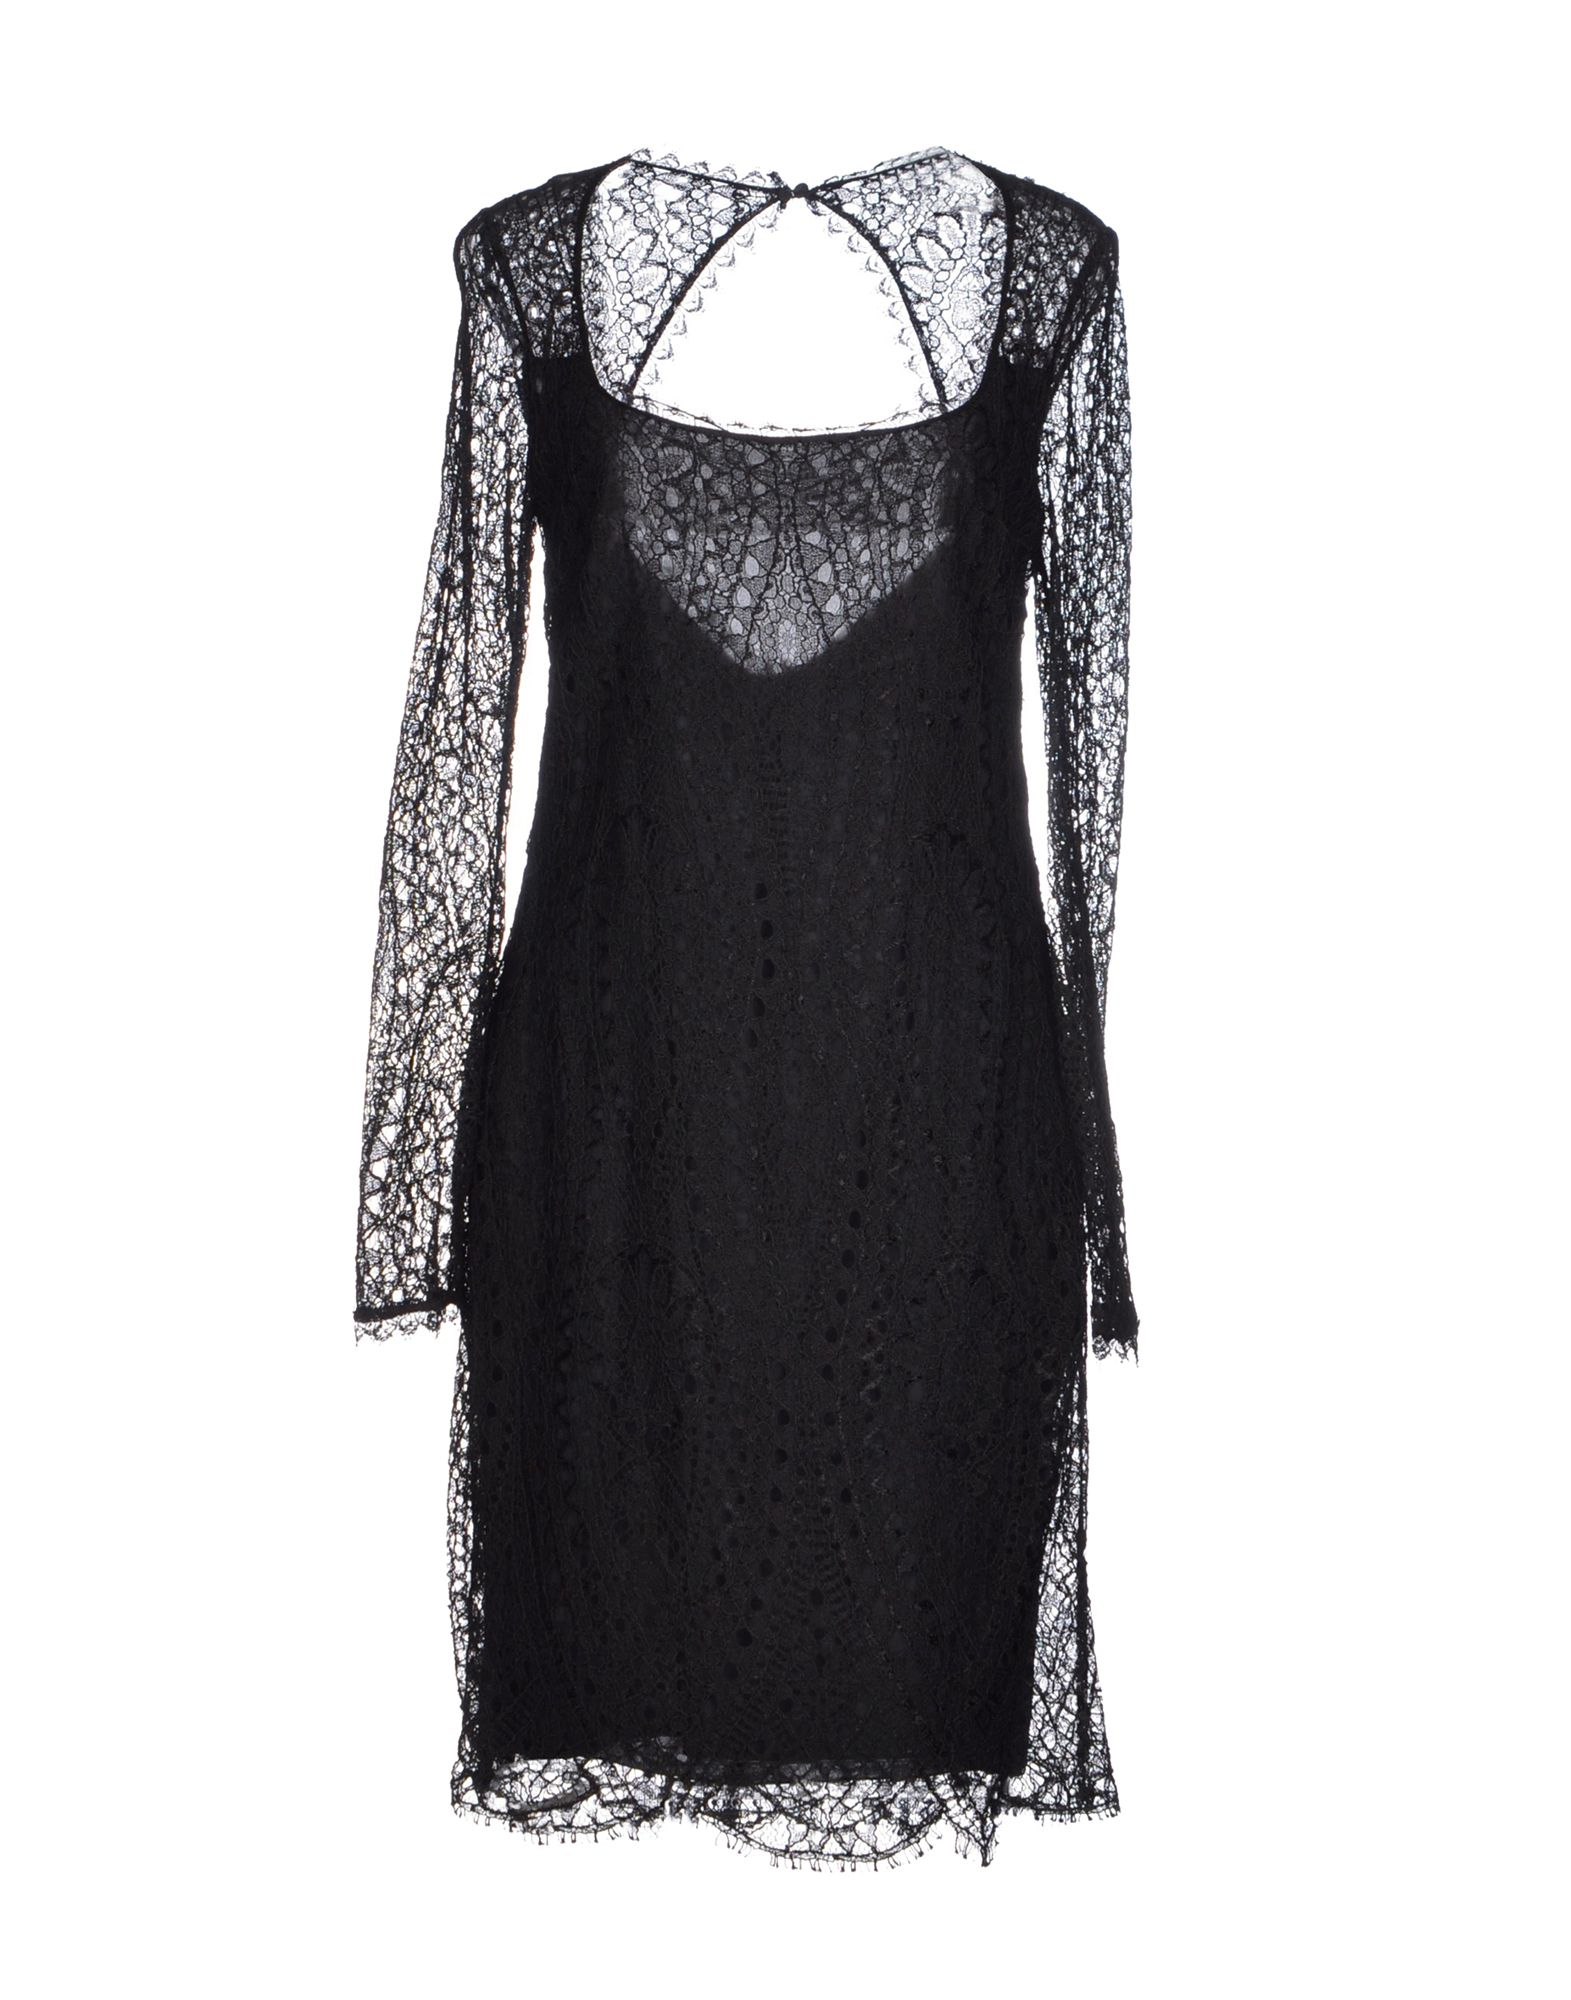 Lyst - Emilio Pucci Long Sleeve Lace Dress in Black